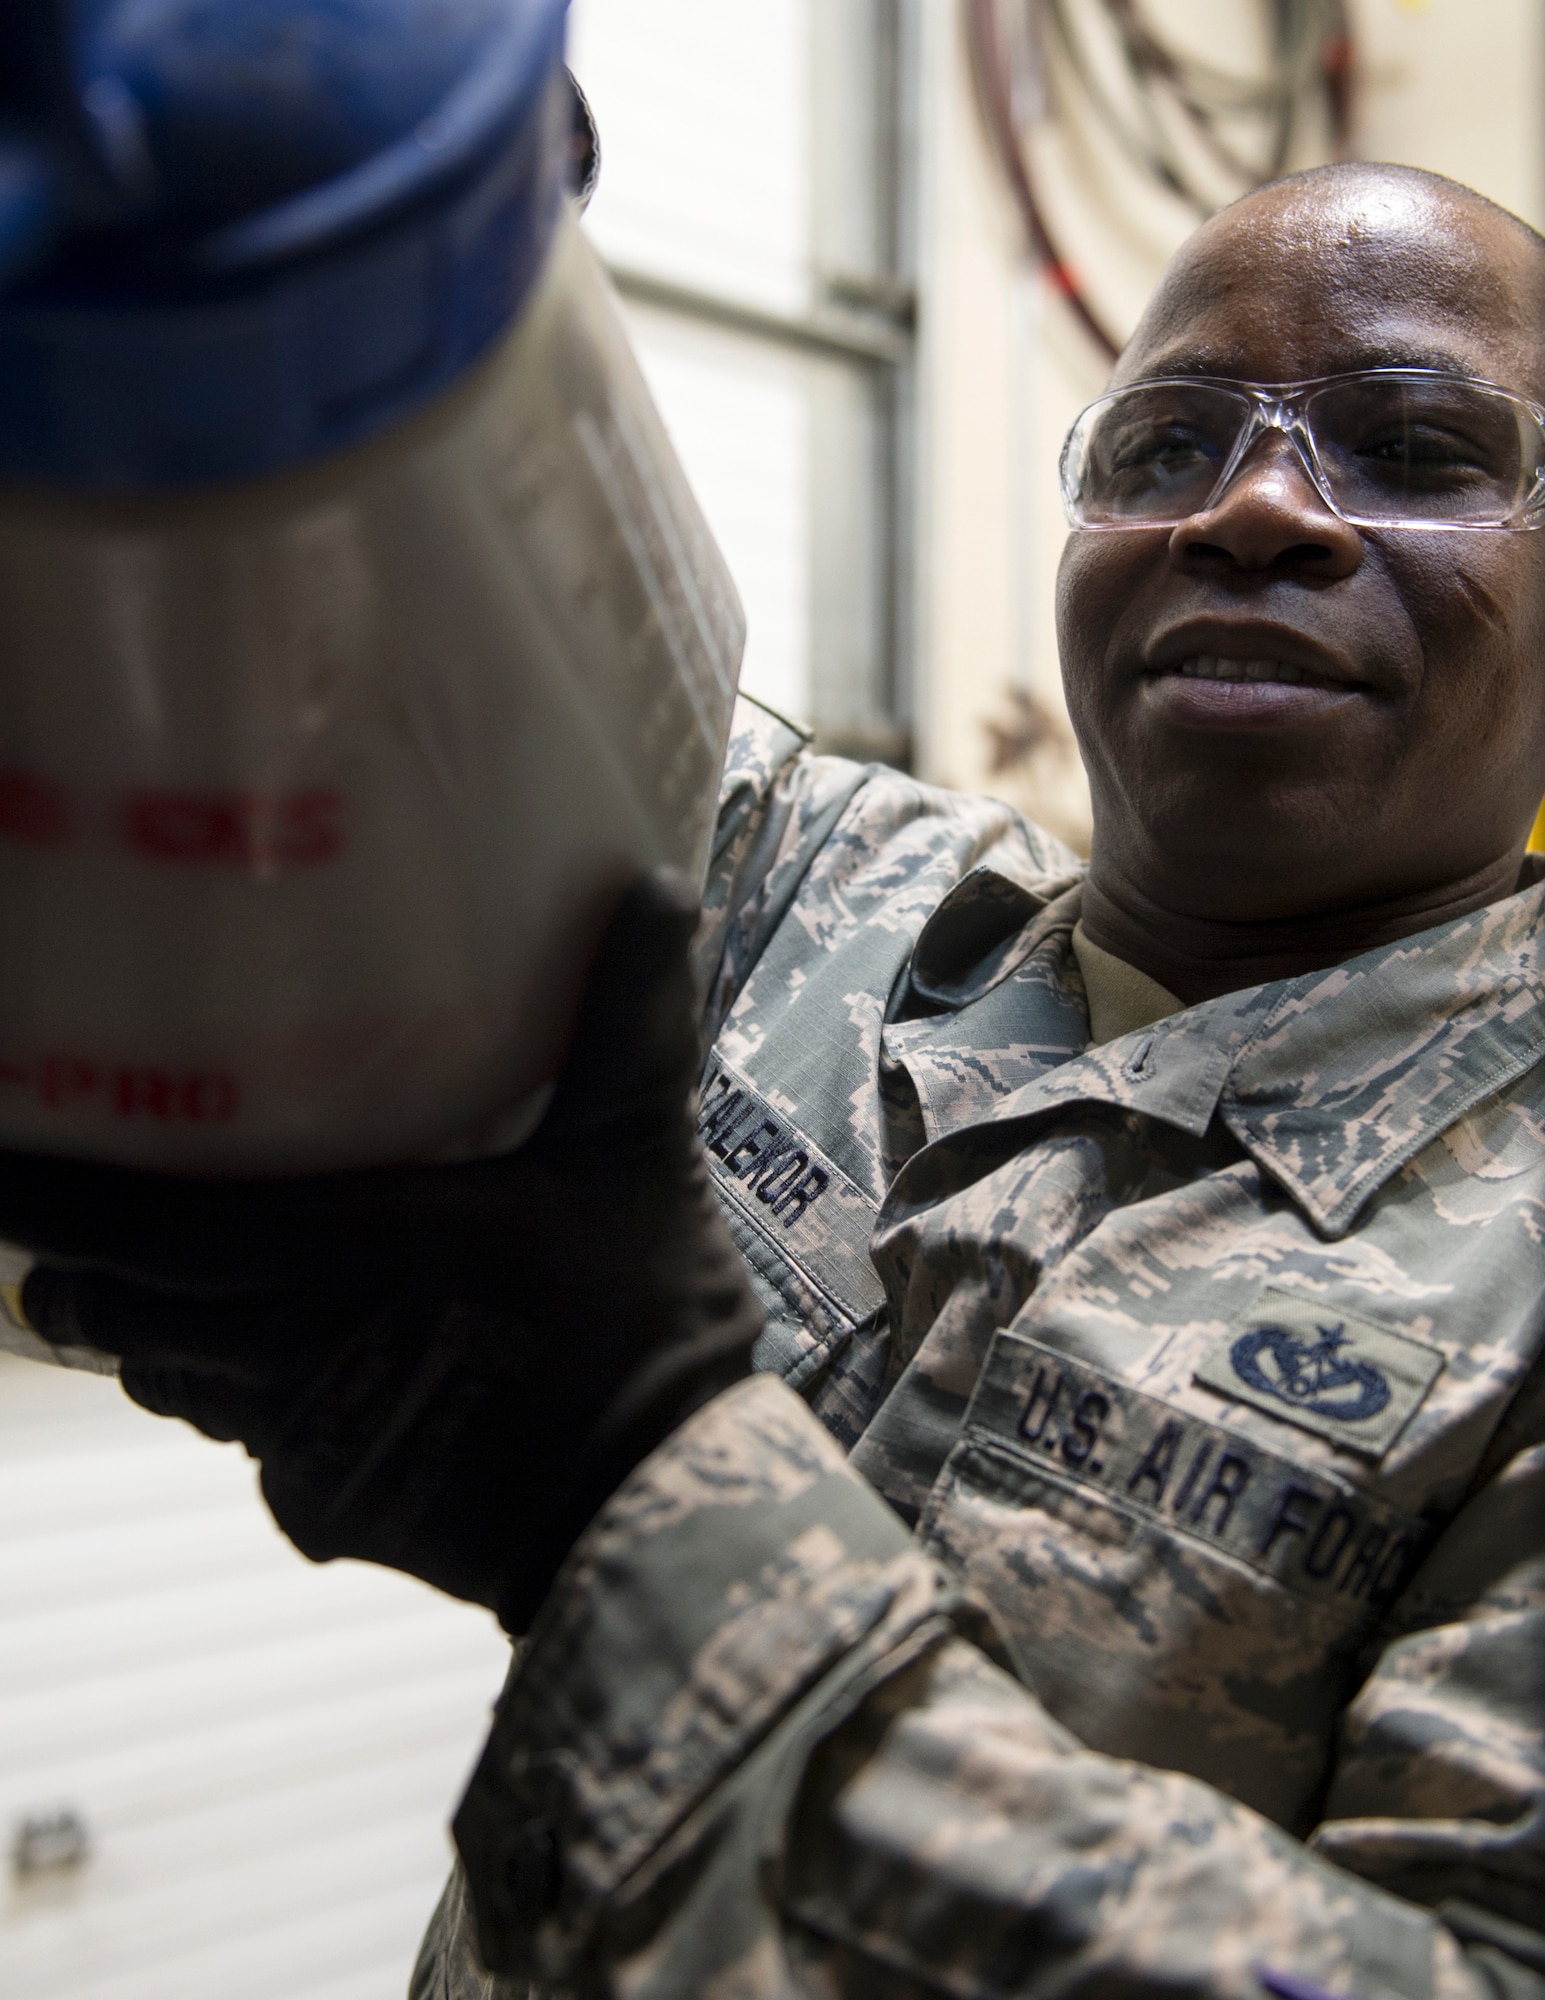 U.S. Air Force Tech. Sgt. Kokou Azalekor, an electrical power production technician with the 133rd Civil Engineer Squadron, adds oil to MEP 009B generator in St. Paul, Minn., Feb. 12, 2020.